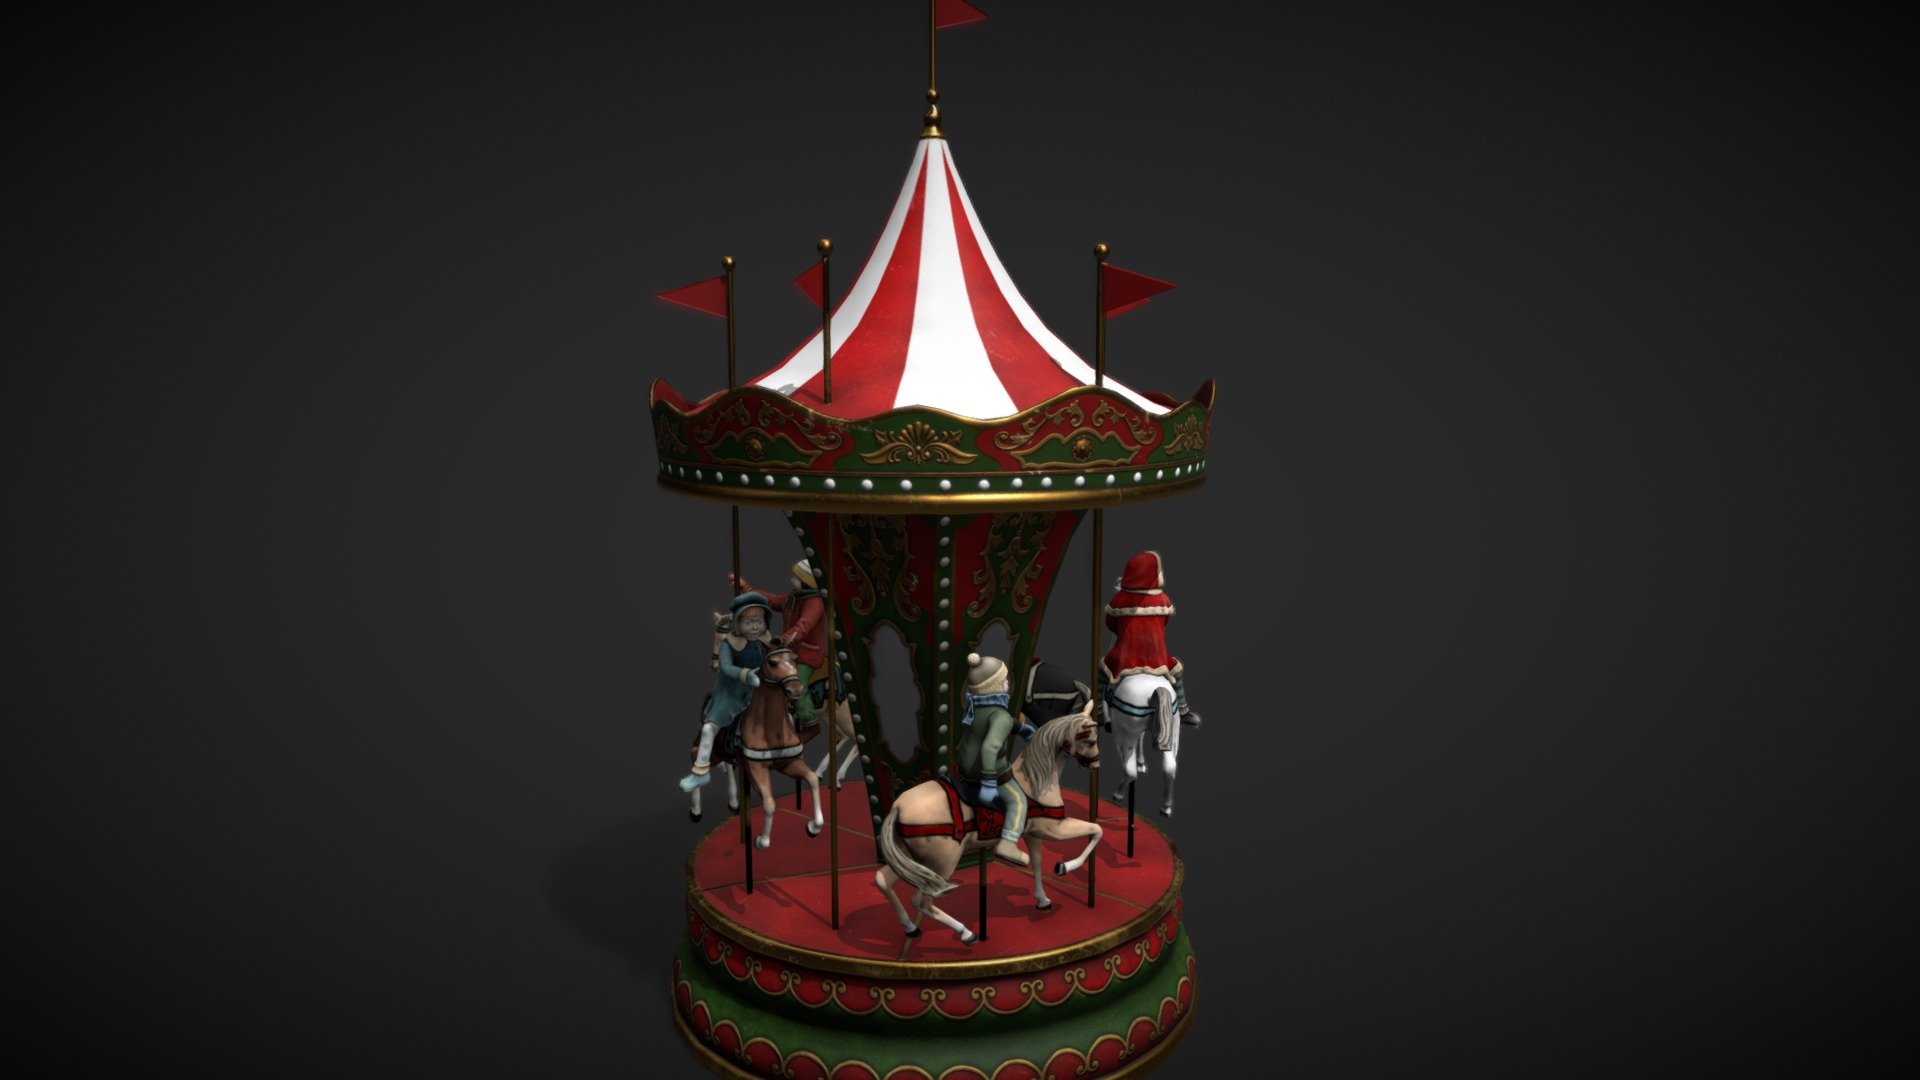 Carousel. 
Lowpoly model of vintage mechanical toy. It was made in 3Ds Max. You can see the sample of that on the screenshots or demo video provided. 
The model would be suited as additional model for your Christmas or winter scenes. The model has looped animation in FBX format.
Maps format: TGA
Maps res.: 4096X4096 - Animation FBX - Buy Royalty Free 3D model by Vaarg 3d model